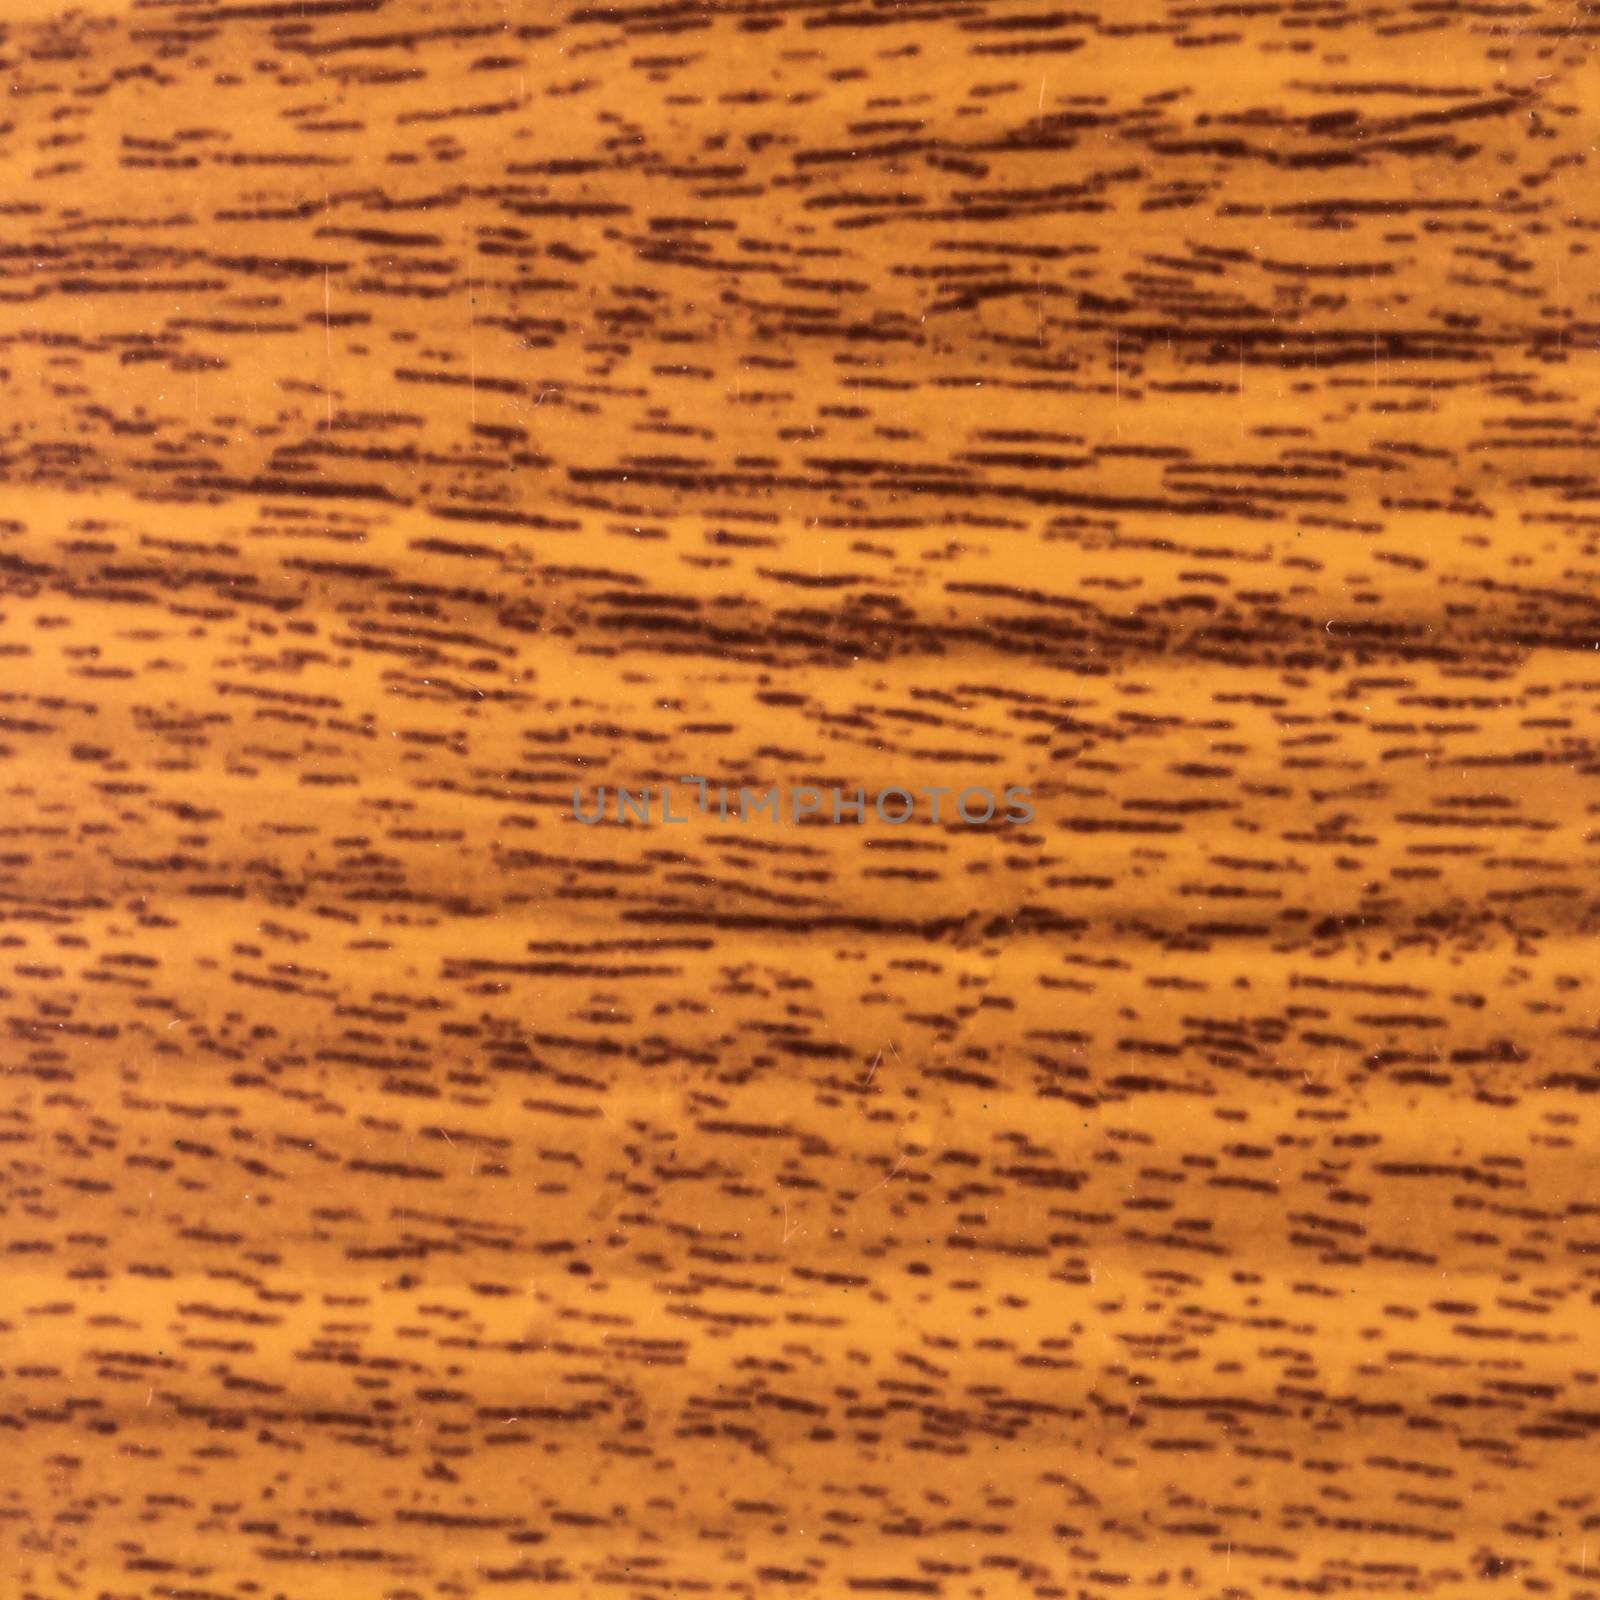 Abstract wood texture with focus on the wood's grain. Chestnut w by AnaMarques